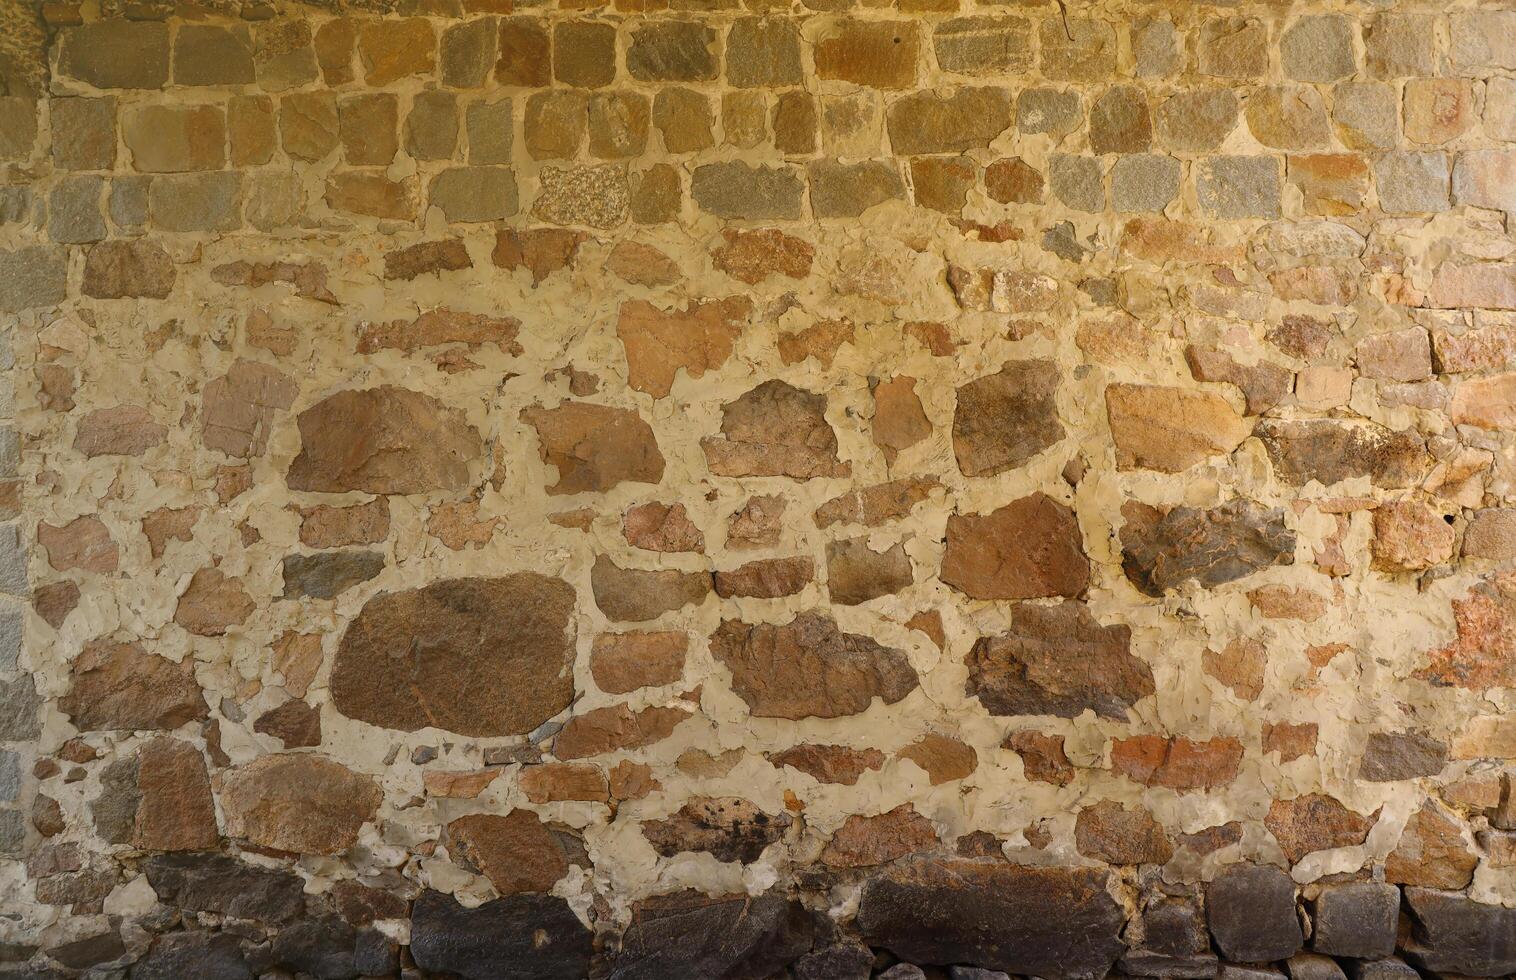 Texture of a stone wall with many big brown and grey stones armed with cement. Old castle stone wall texture background for medieval usage. Part of a stony building photo